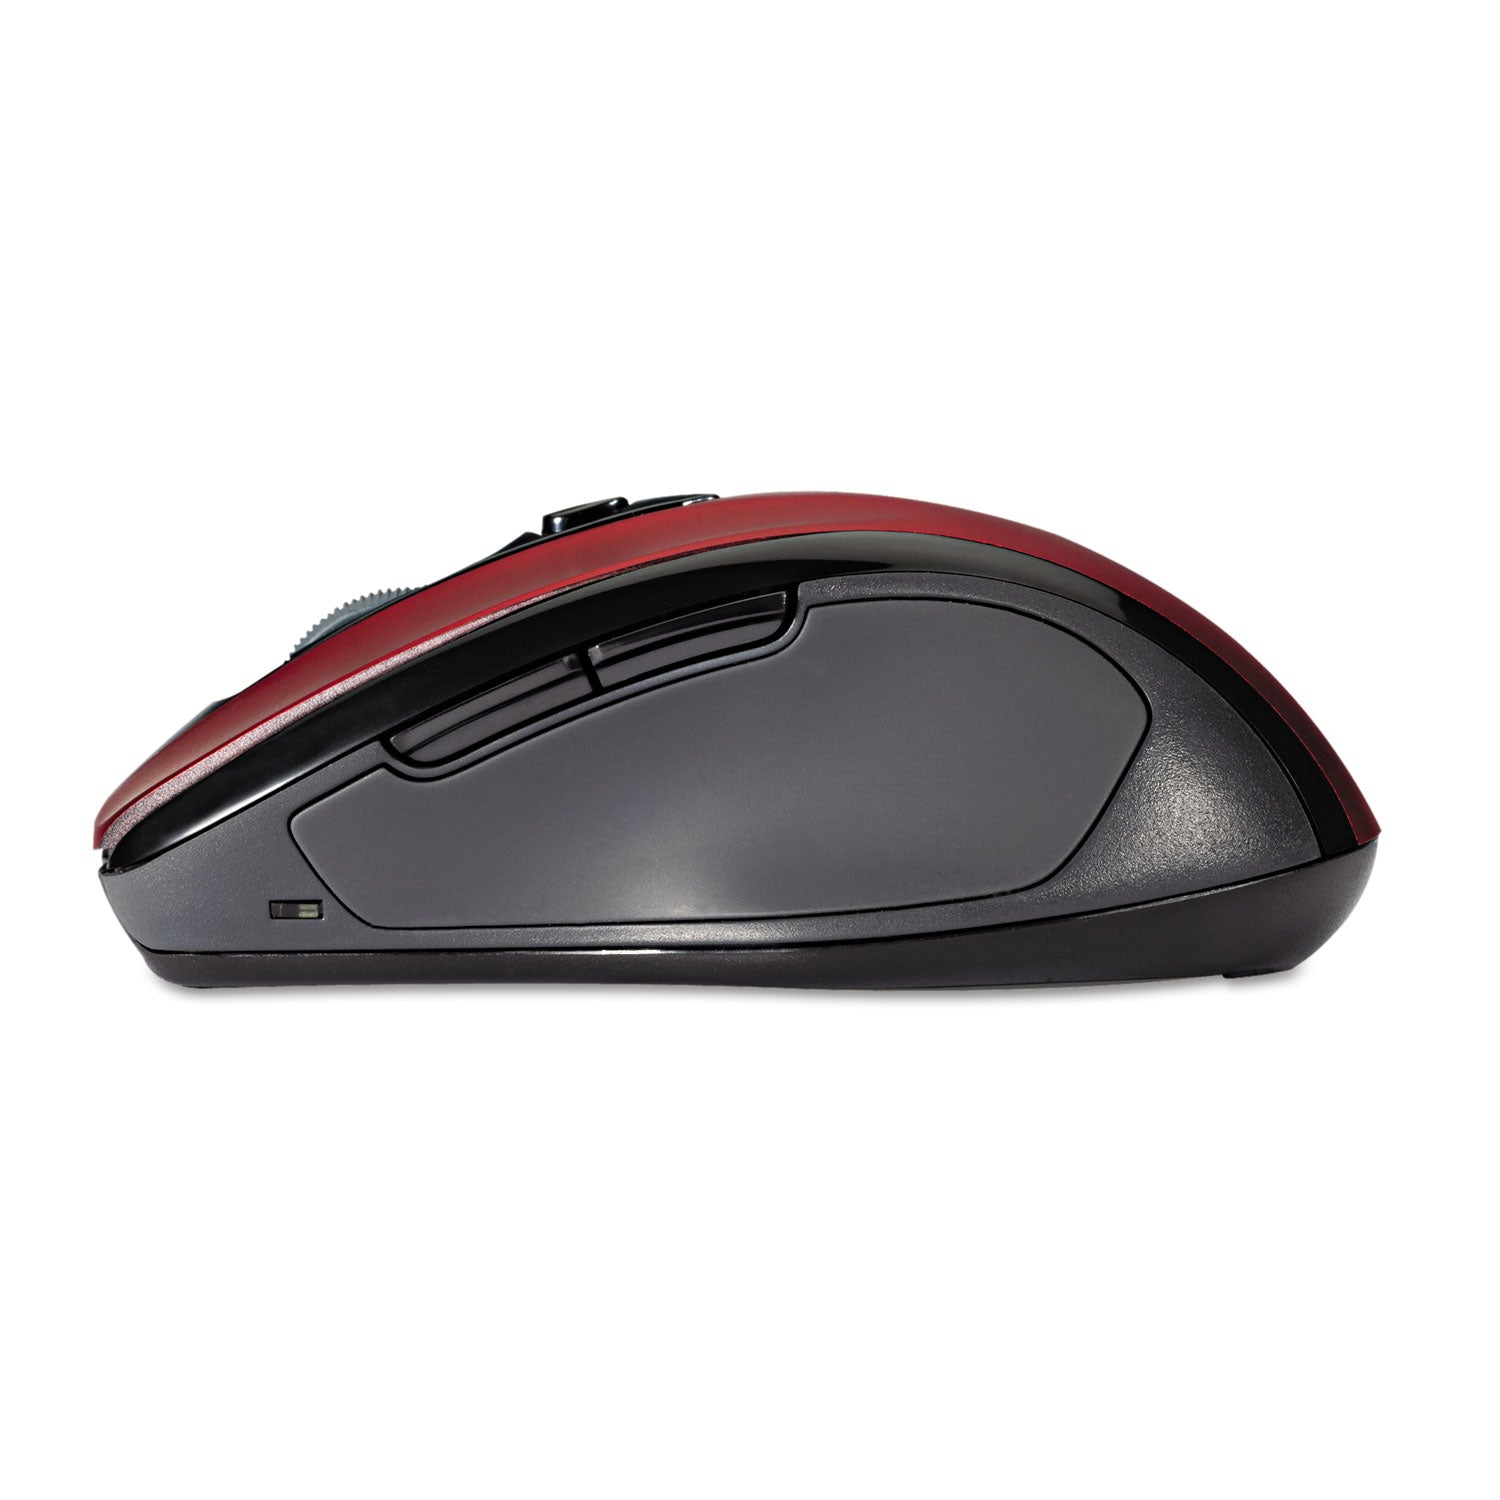 Pro Fit Mid-Size Wireless Mouse, 2.4 GHz Frequency/30 ft Wireless Range, Right Hand Use, Ruby Red - 